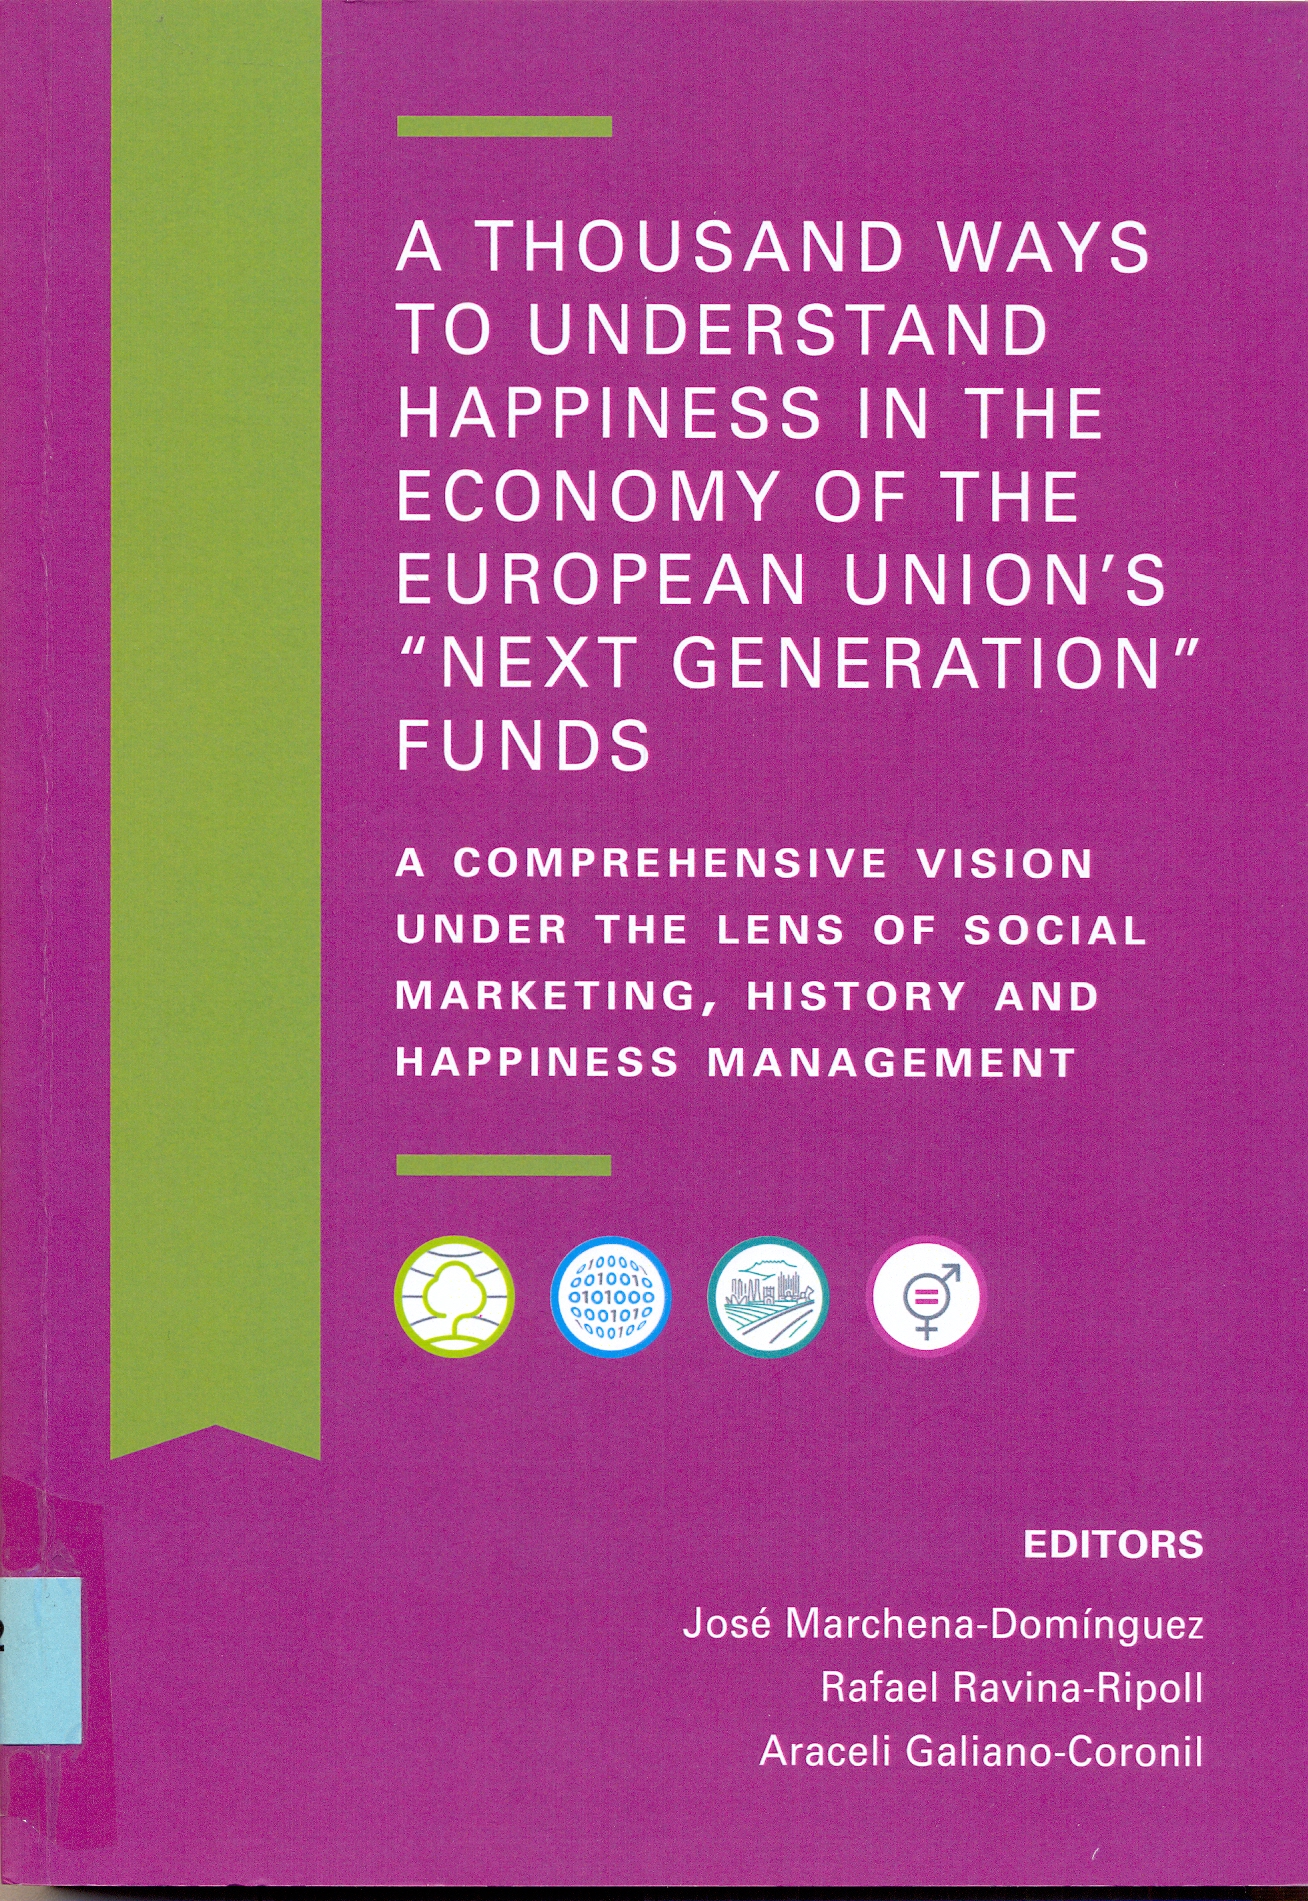 Imagen de portada del libro A thousand ways to understand happiness in the economy of the European Union's "Next generation" funds